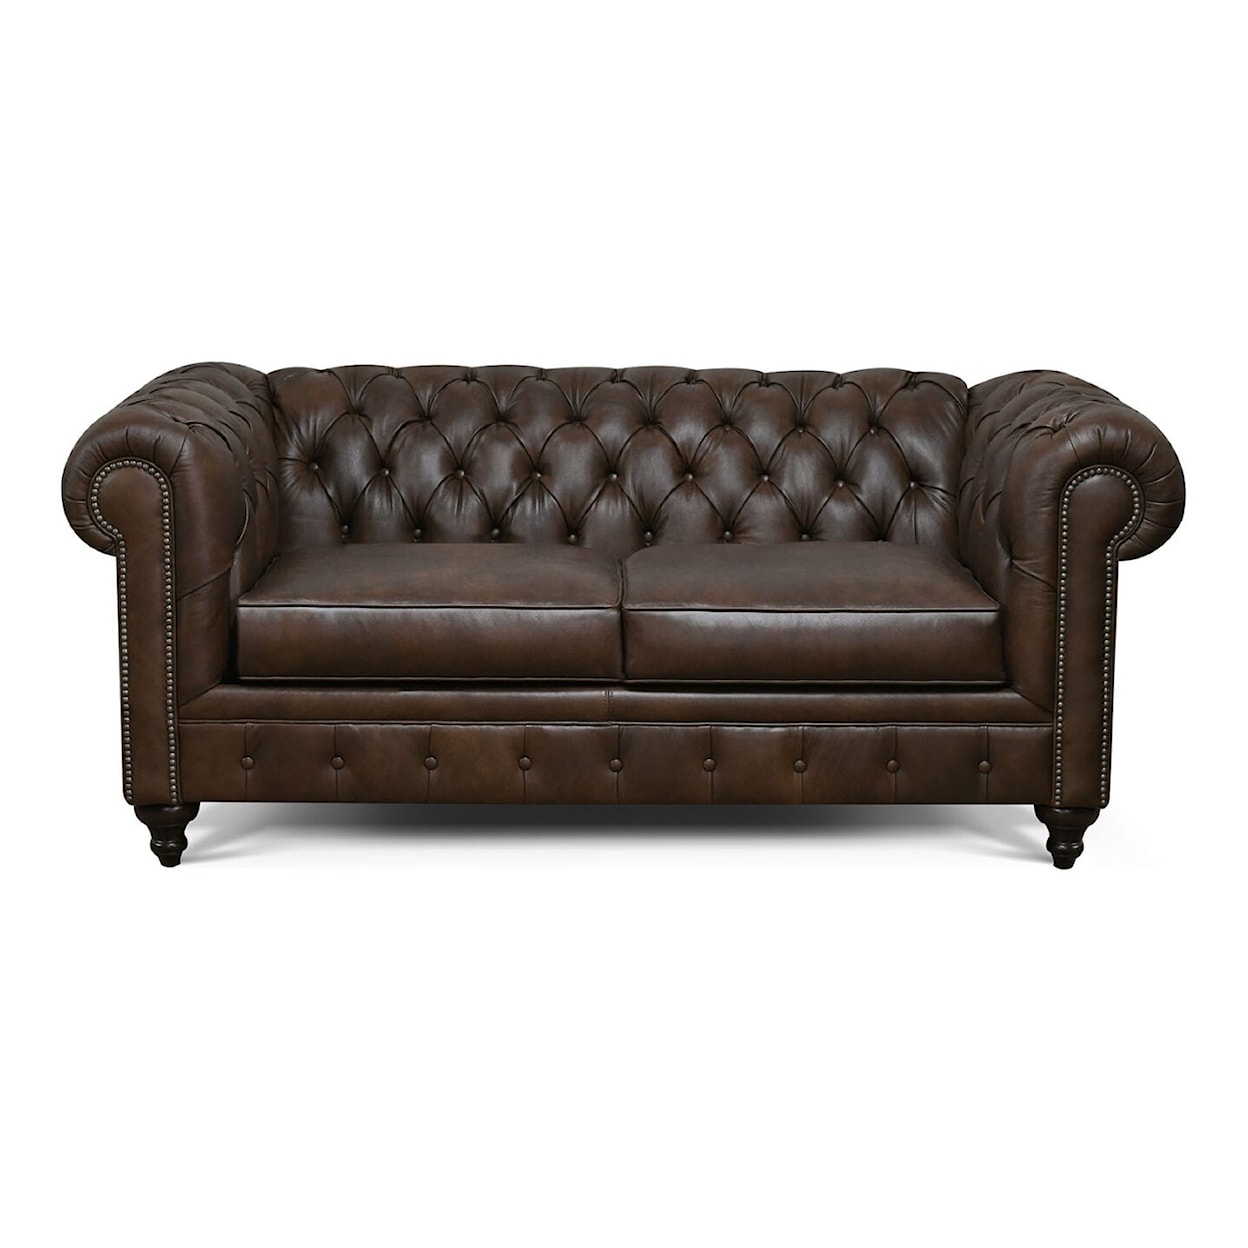 England 2R00/AL Series Chesterfield Loveseat with Nailheads